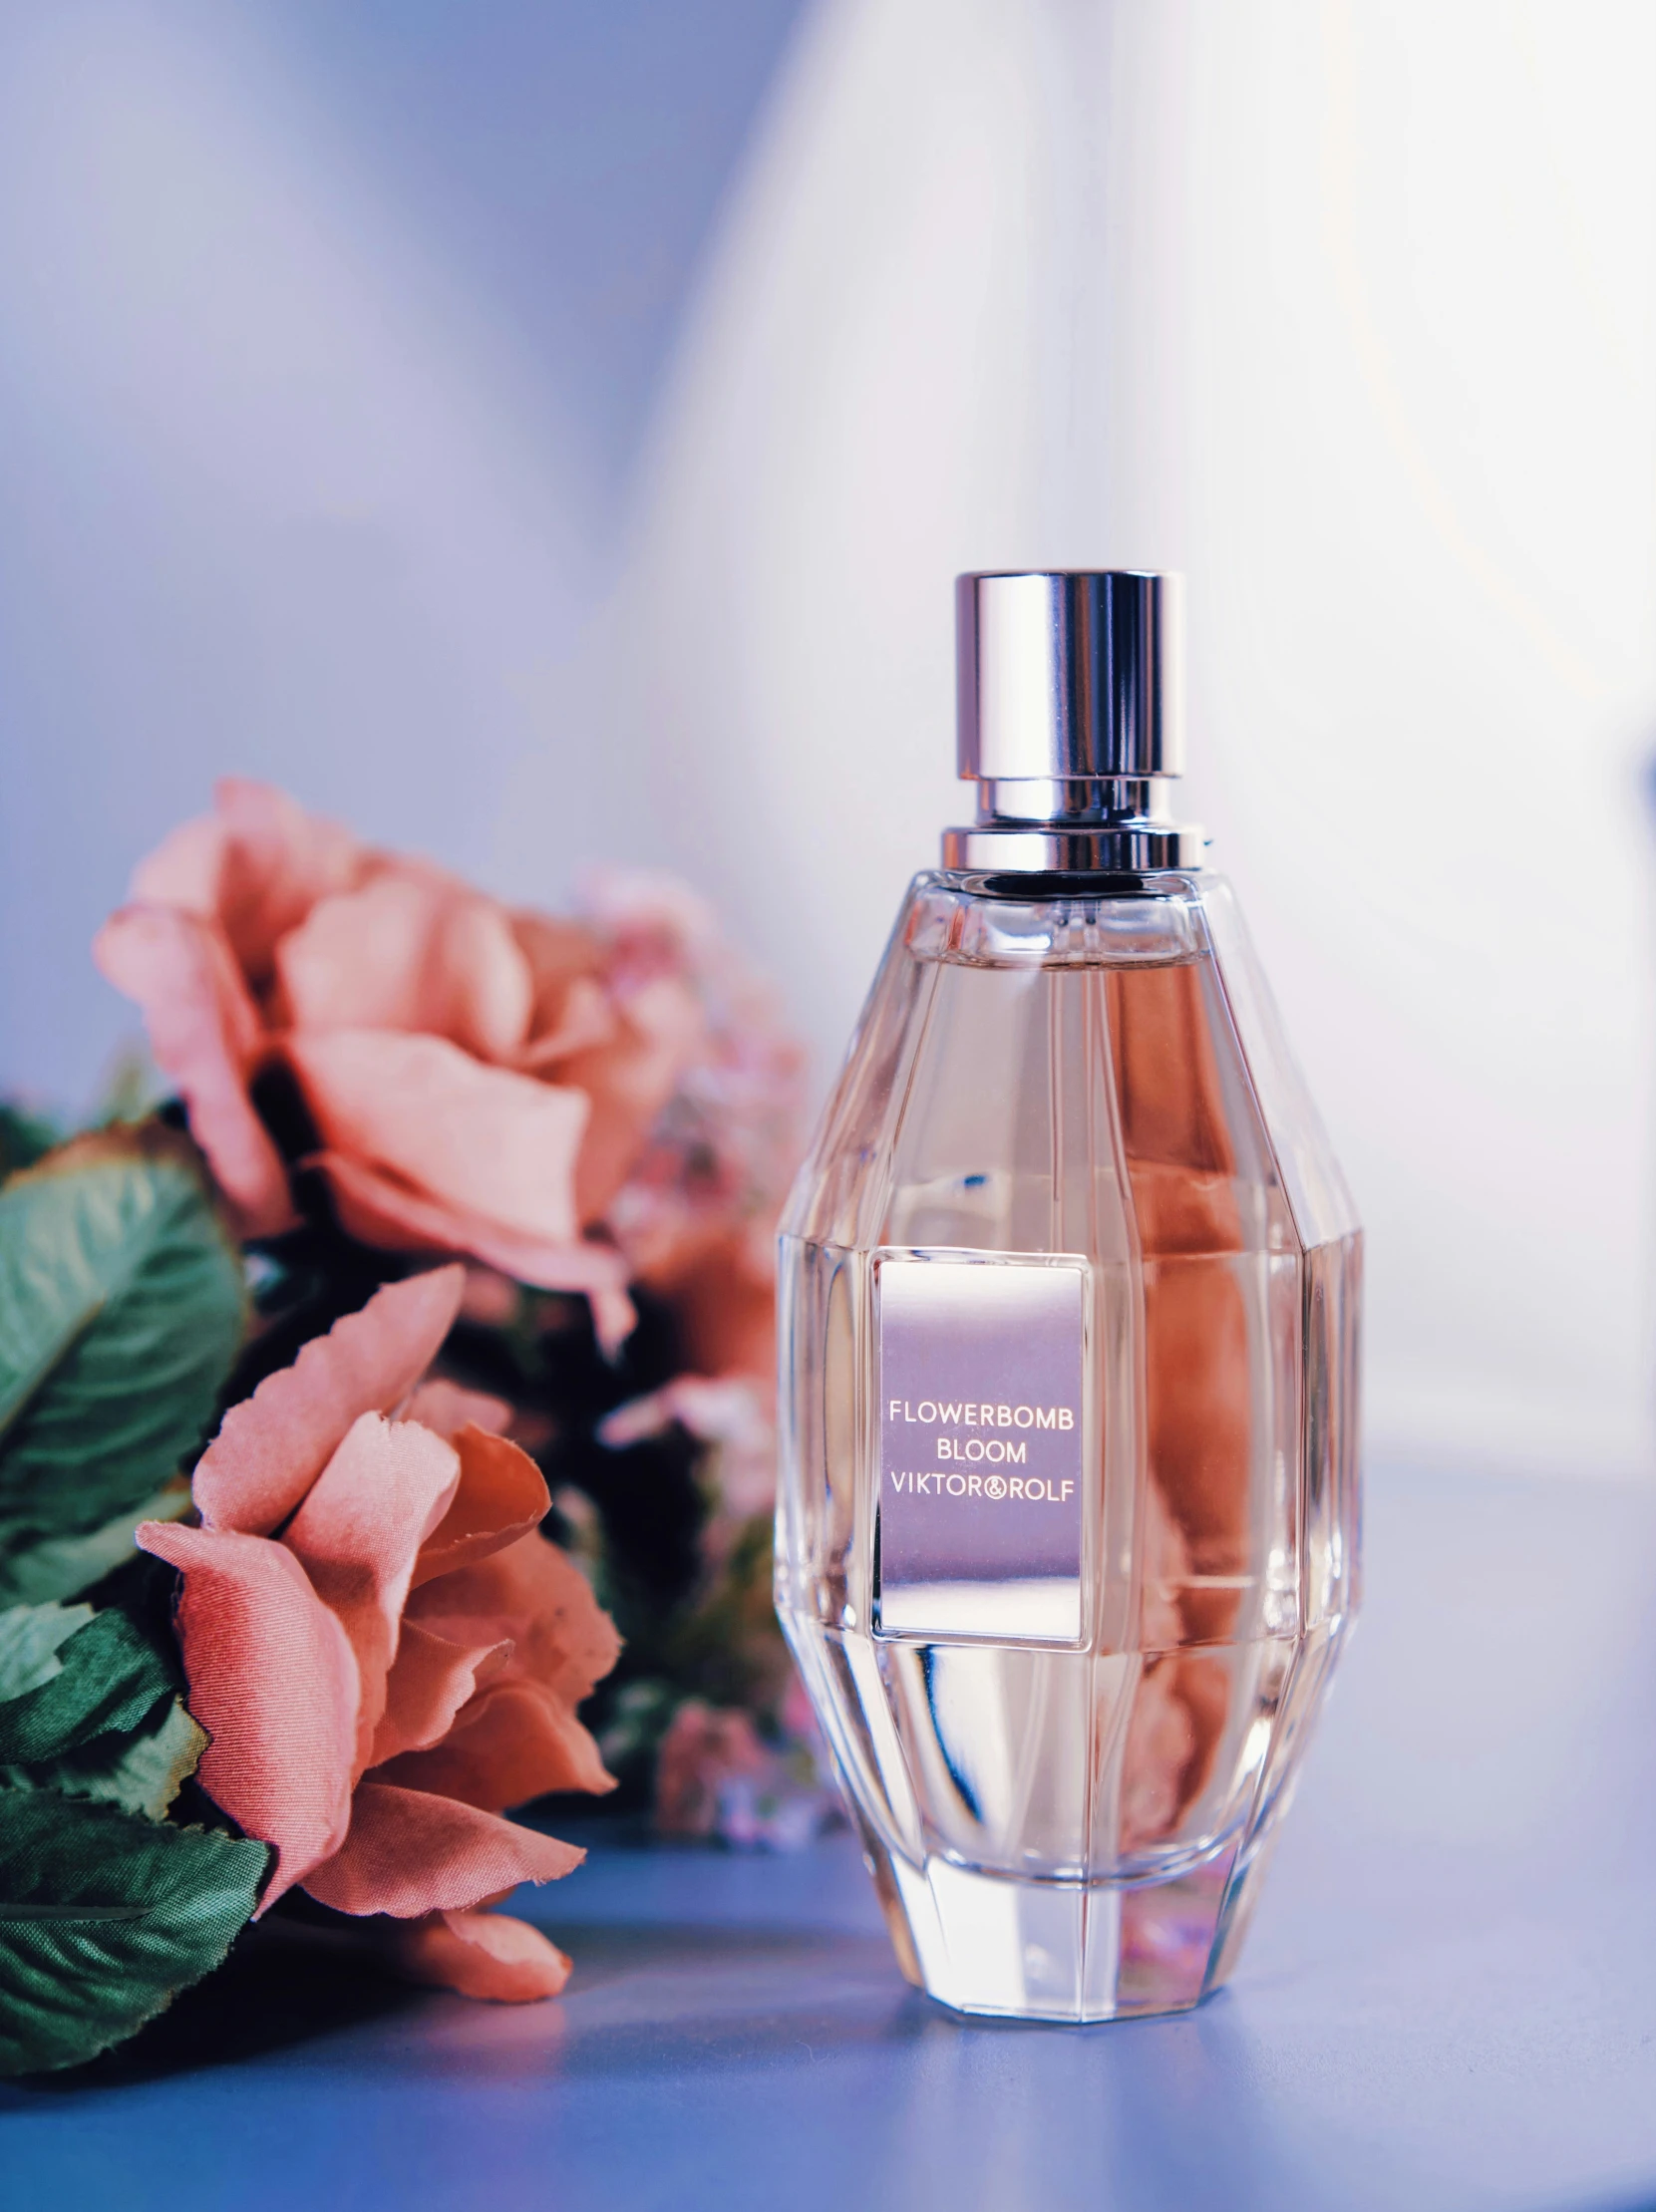 a small bottle of perfume next to some pink flowers